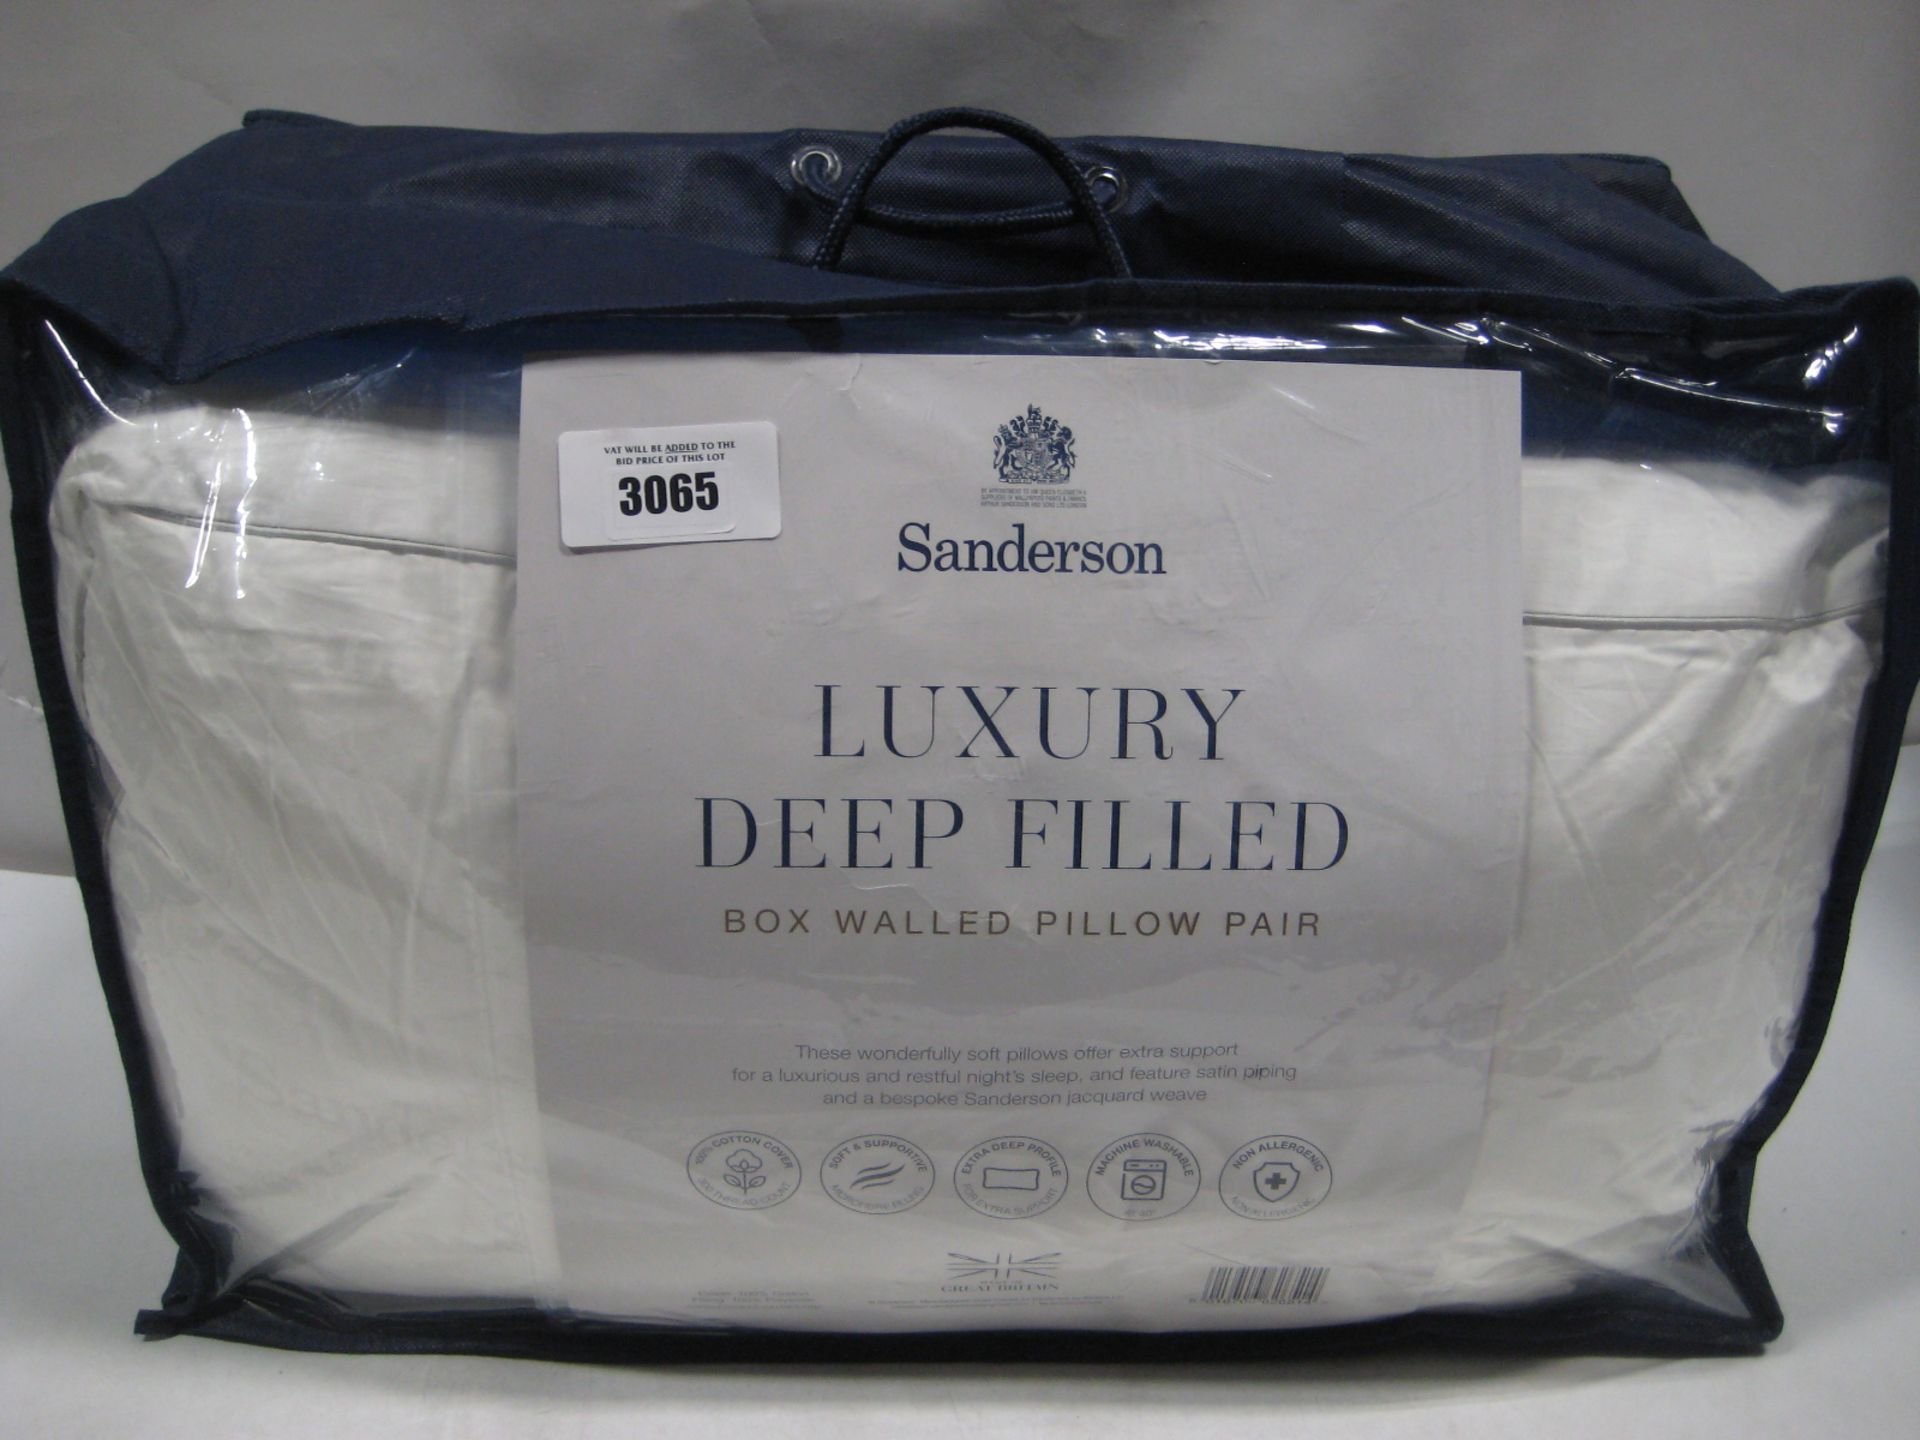 2 bagged luxury deep filled pillows